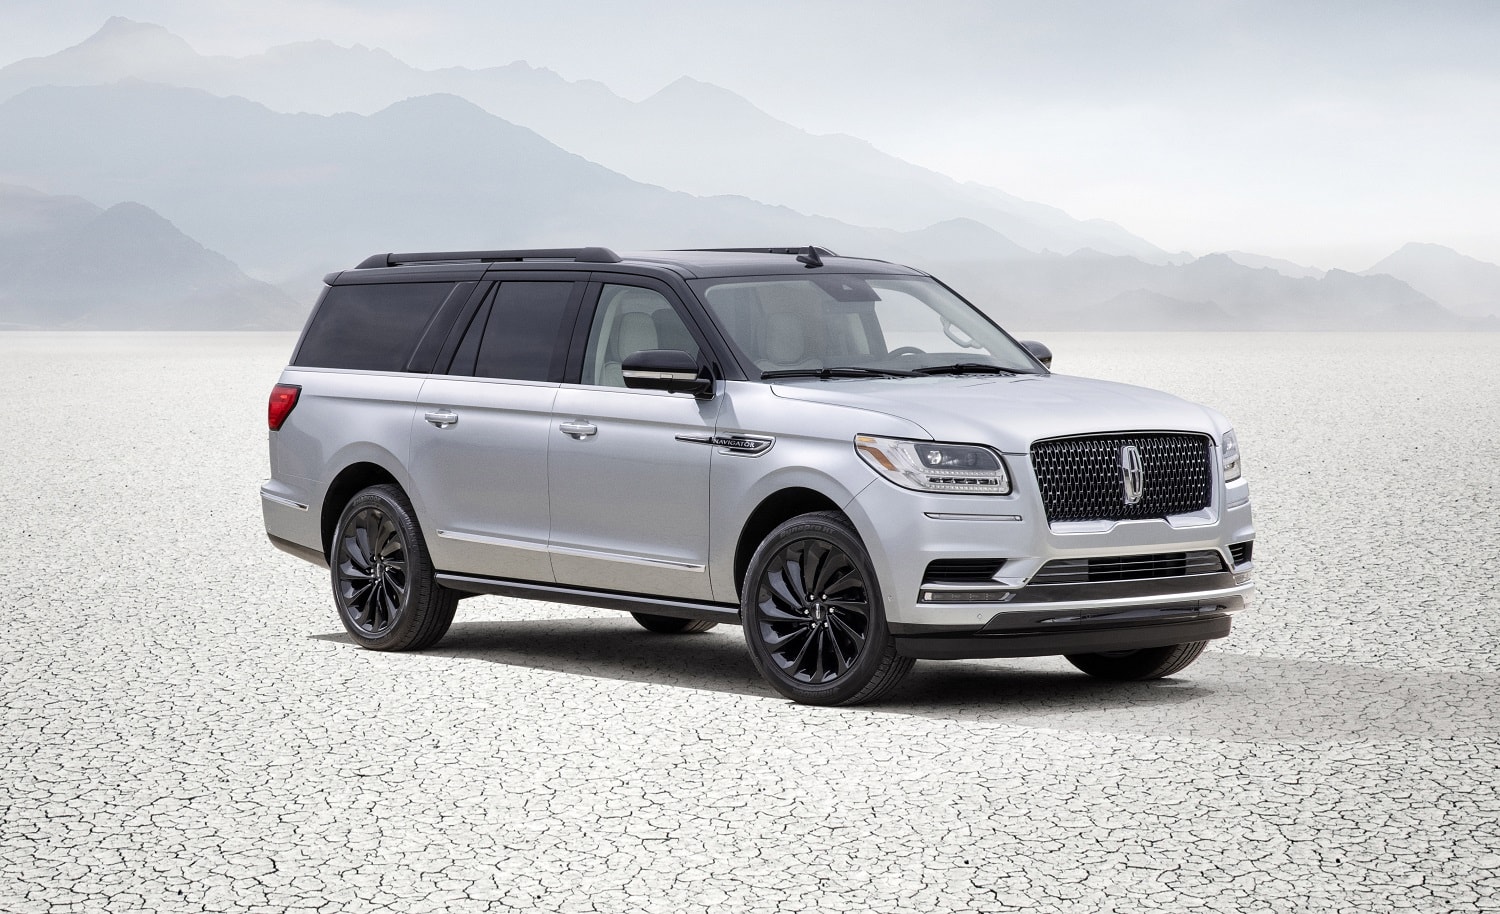 Lincoln Navigator Sales Place Second In Segment During Q3 2021